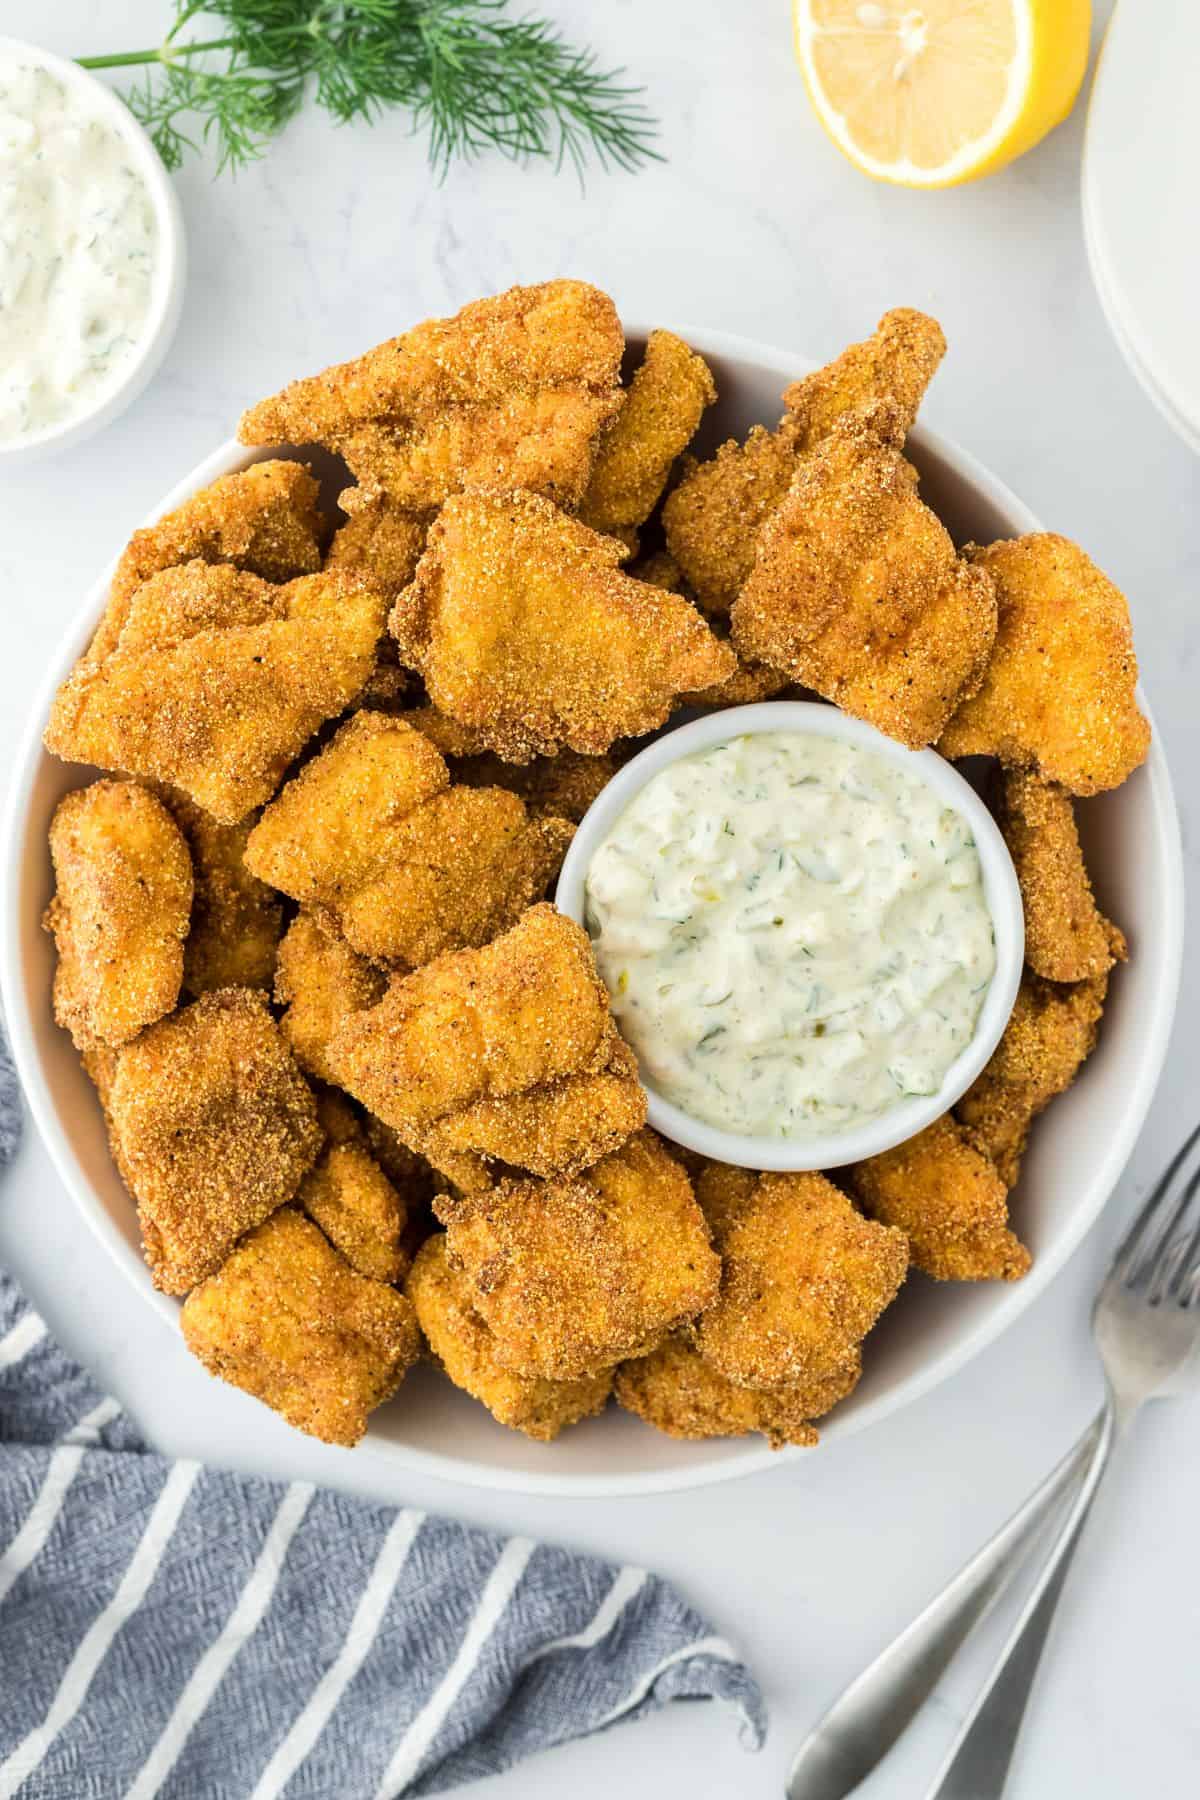 Overhead shot of catfish nuggets in a bowl with a side of tartar sauce, lemon, and dill on a white surface, with a grey and white striped cloth and forks next to it